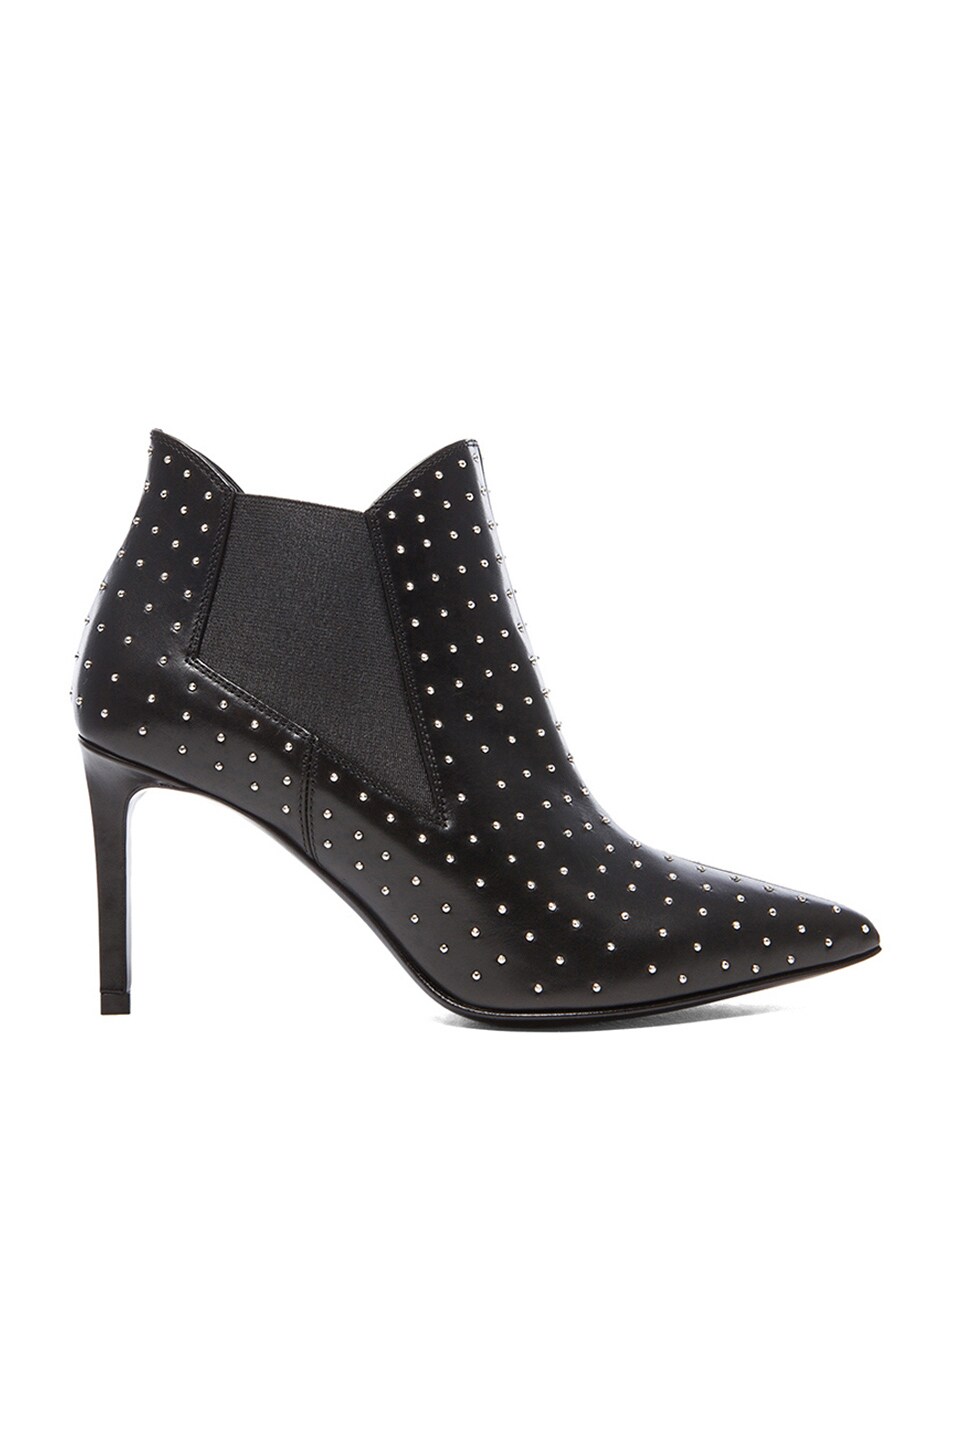 Image 1 of Saint Laurent Paris Studded Pointy Toe Leather Booties in Black